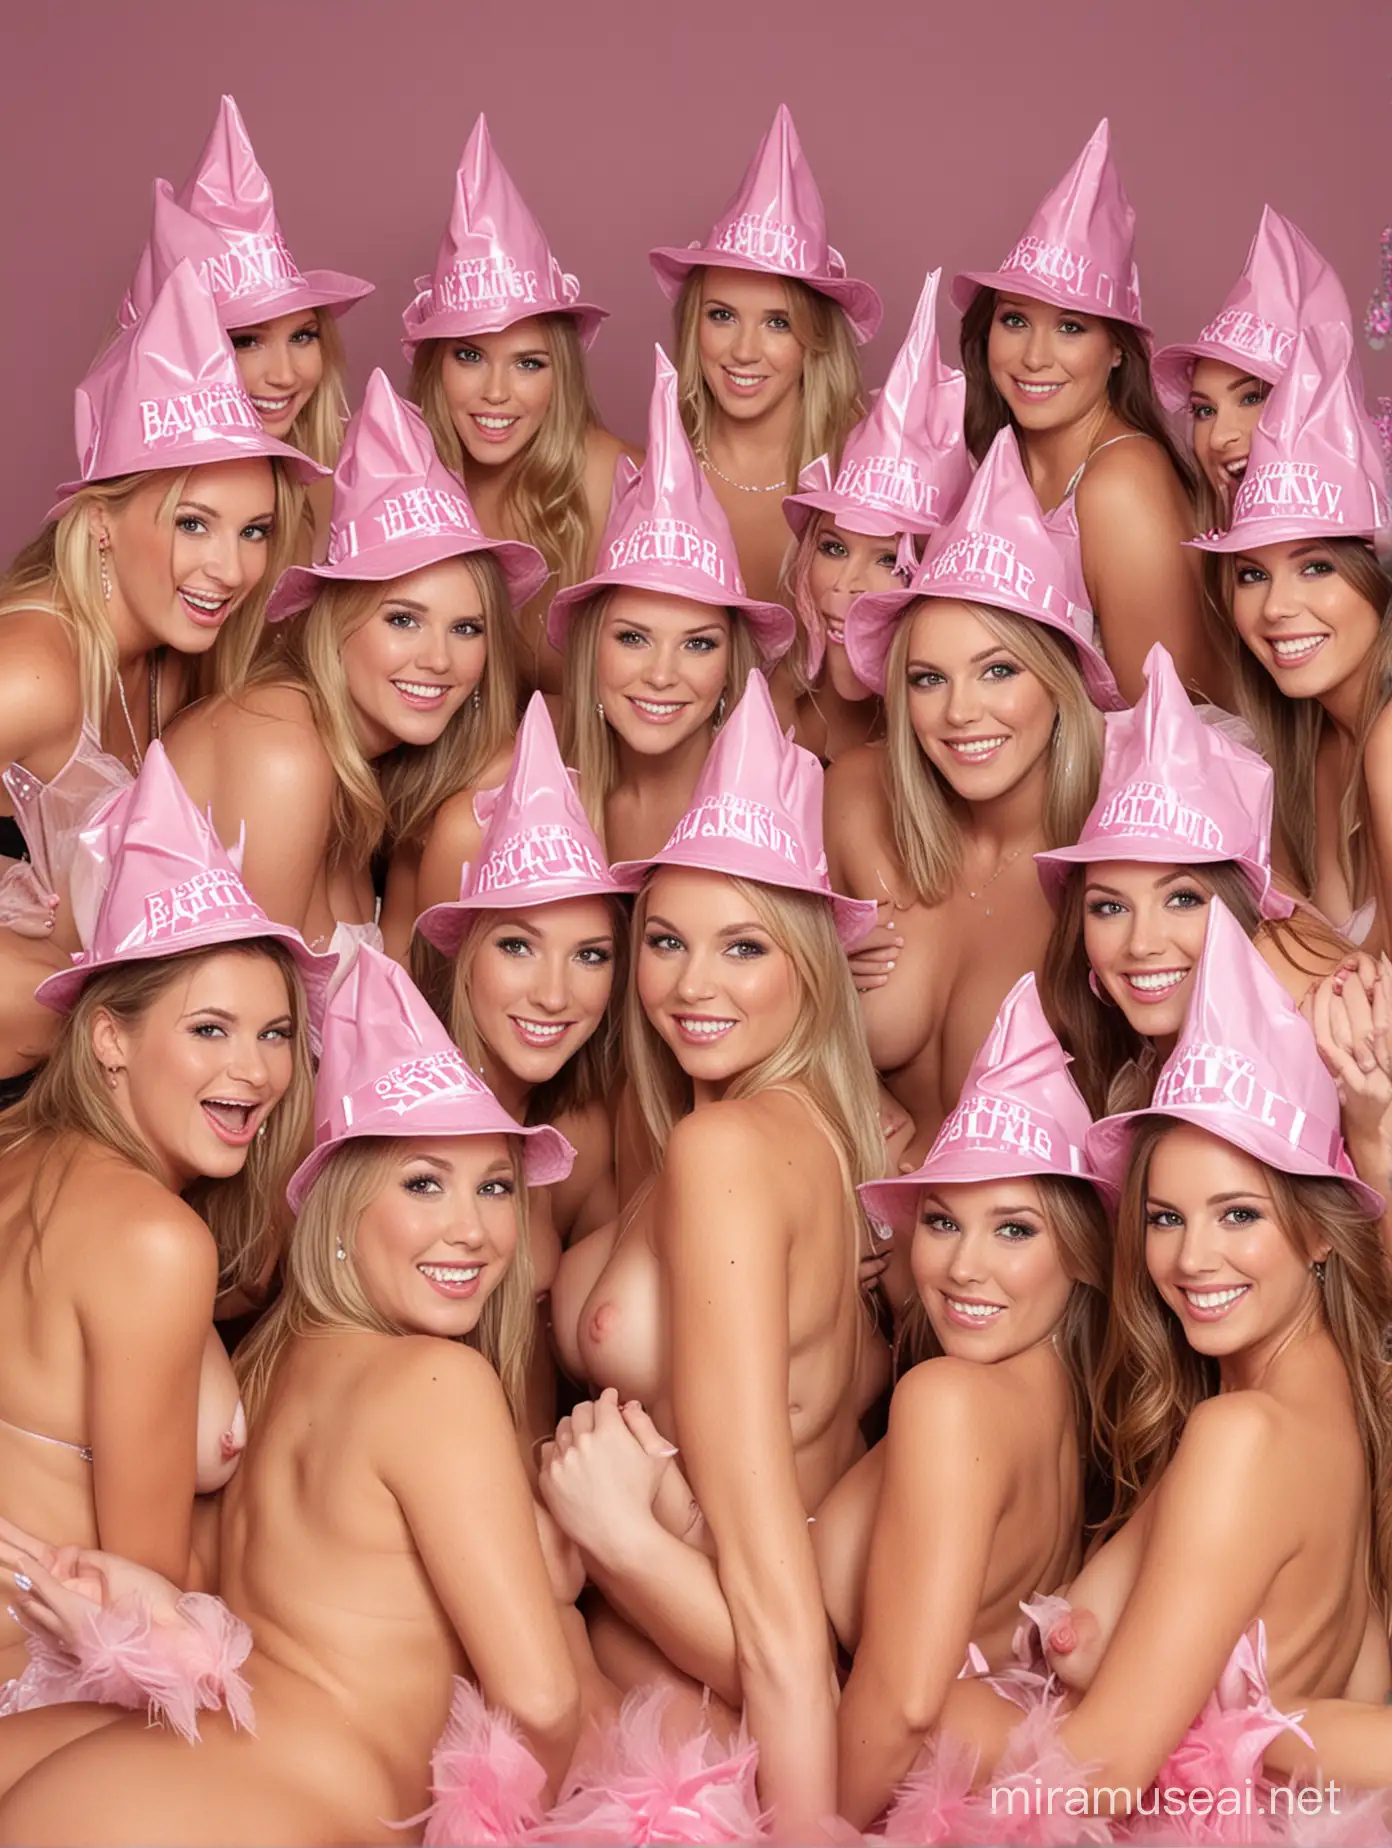 sexy bachelorette party at the club naked pink hats